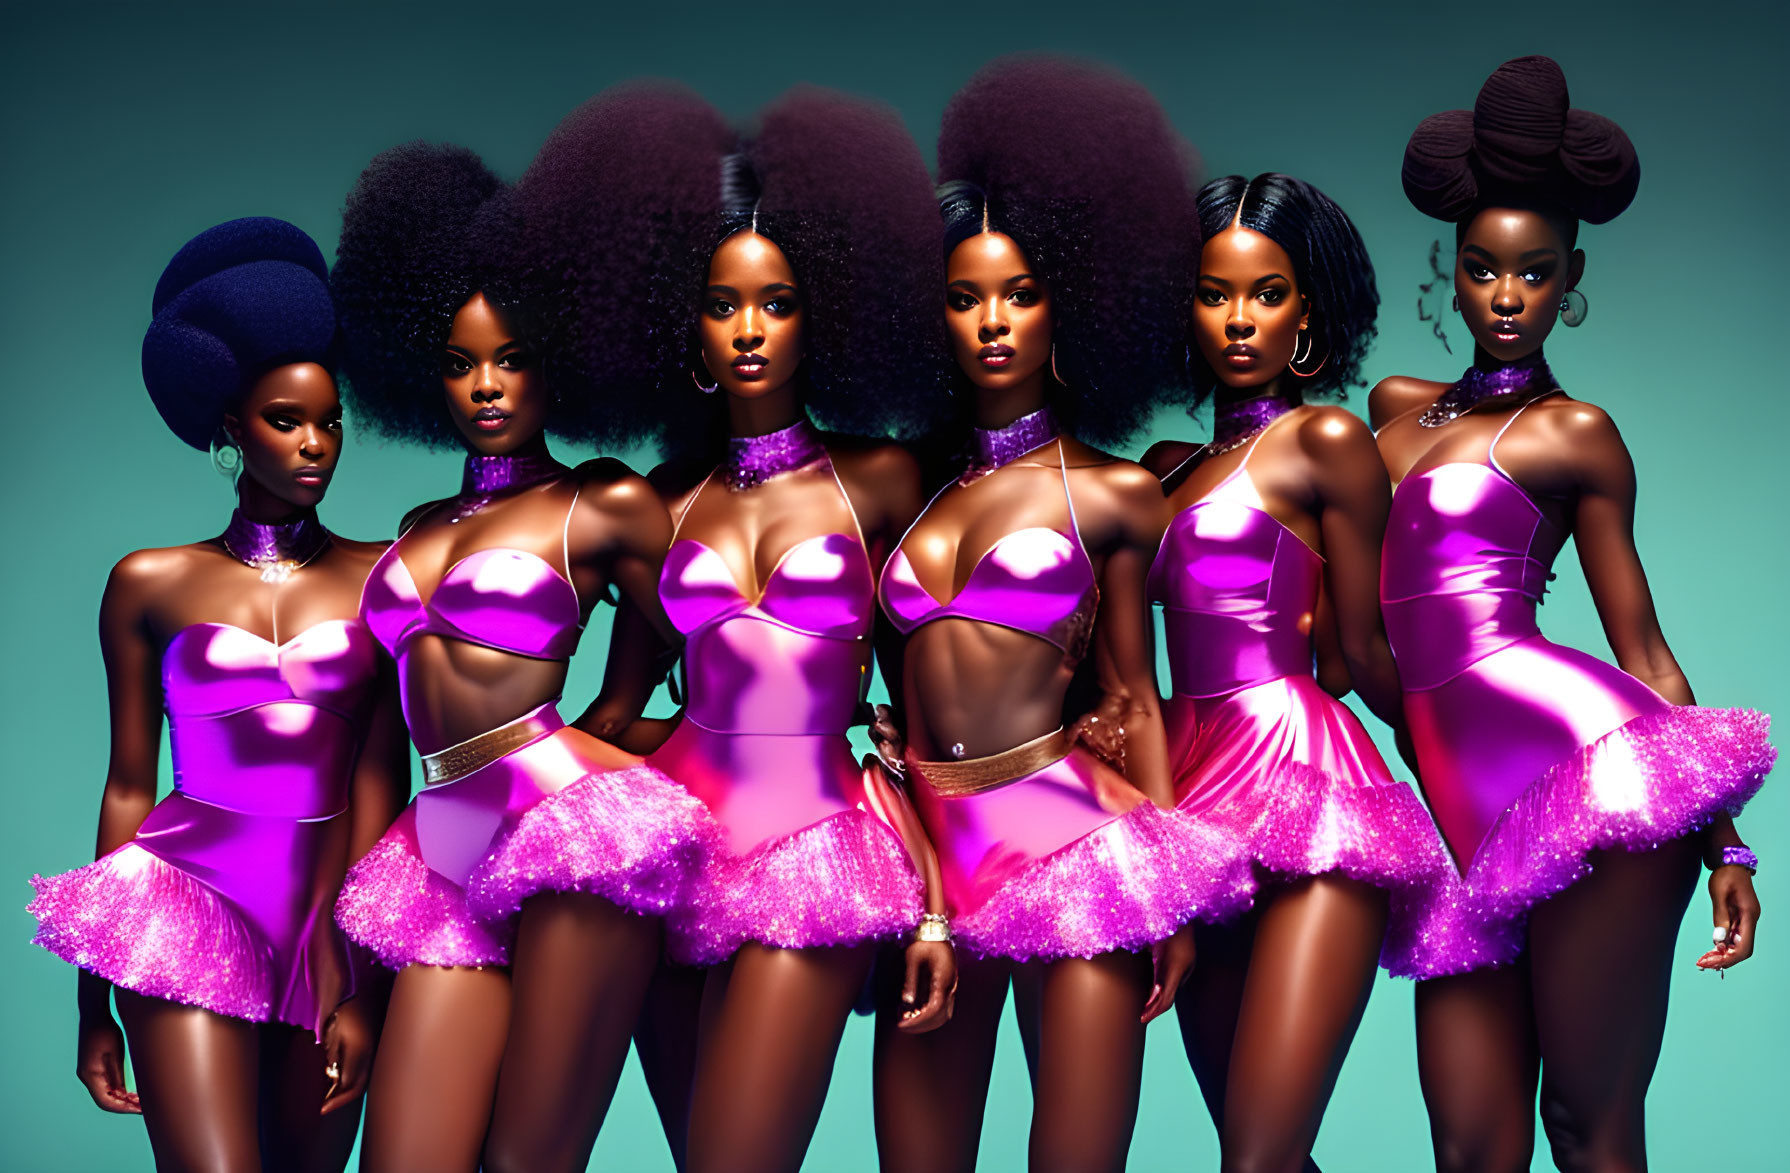 Seven Women with Voluminous Afro Hairstyles in Shiny Purple Outfits on Teal Background